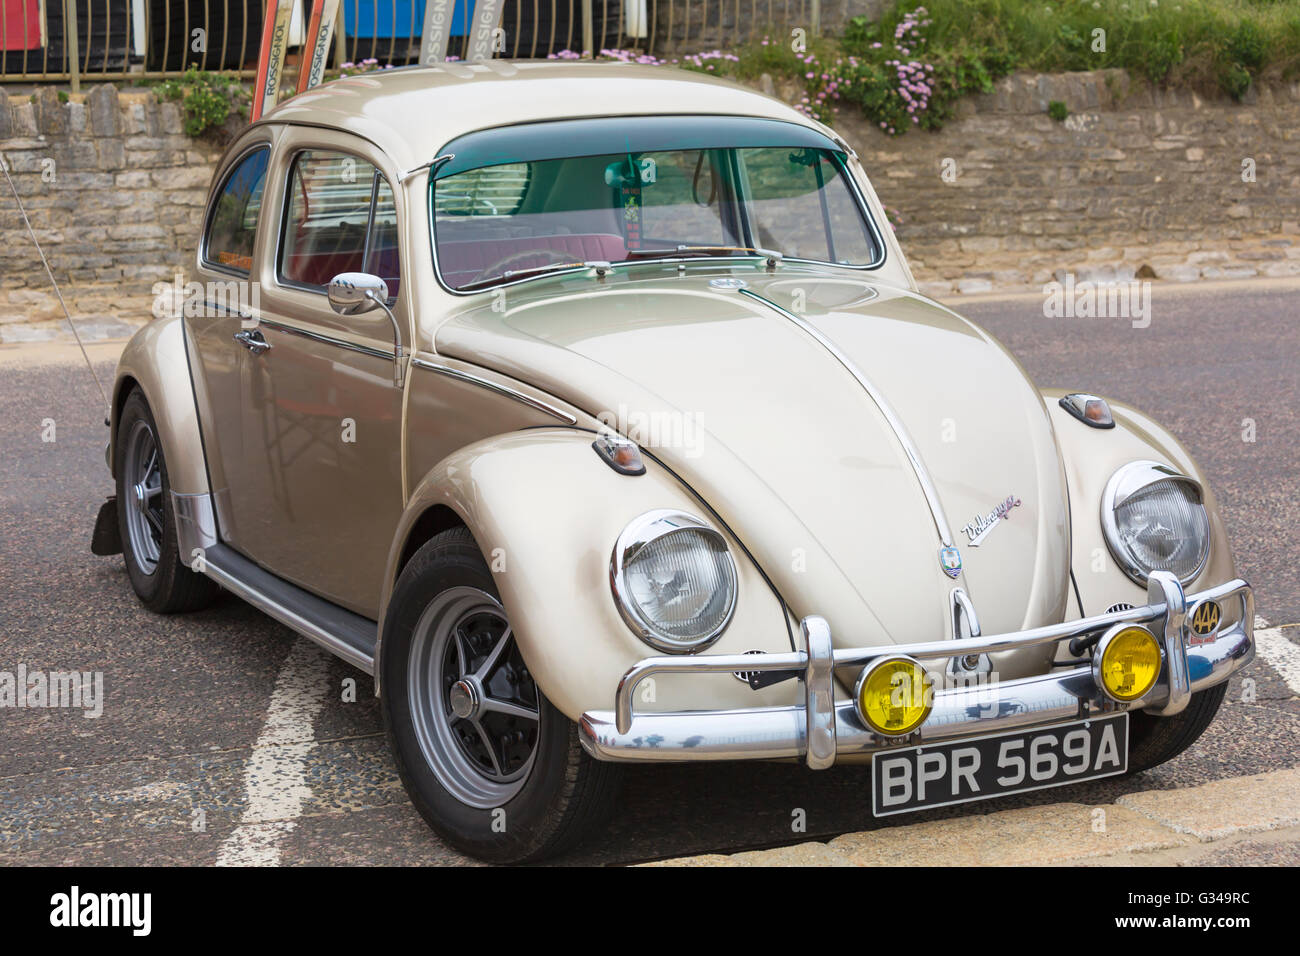 Gold coloured Volkswagen beetle at Bournemouth Wheels Festival at Bournemouth, Dorset UK in June Stock Photo